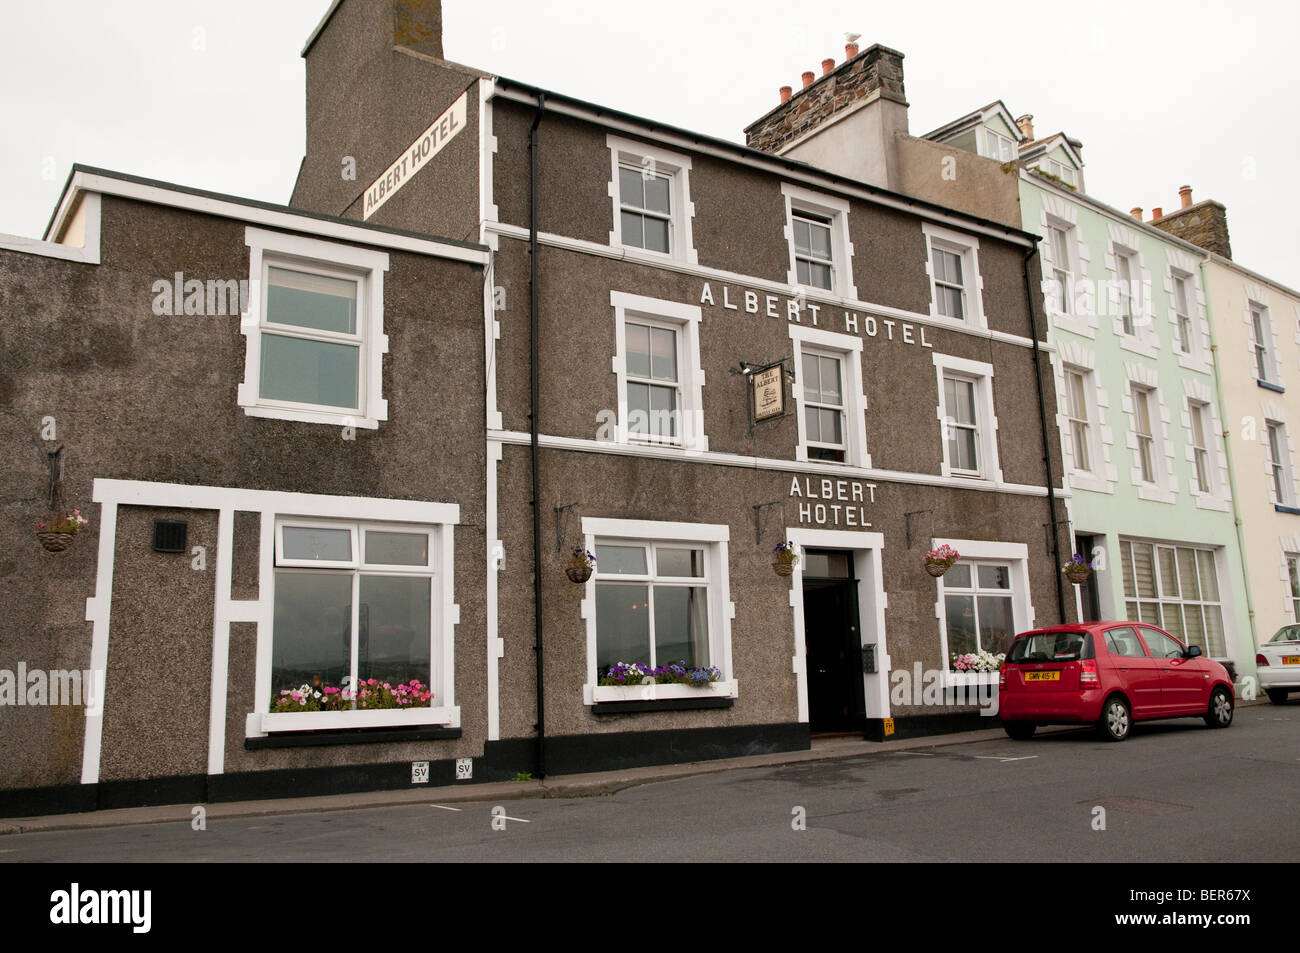 The Albert Hotel, a pub and bar in Port St Mary, Isle of Man. Stock Photo